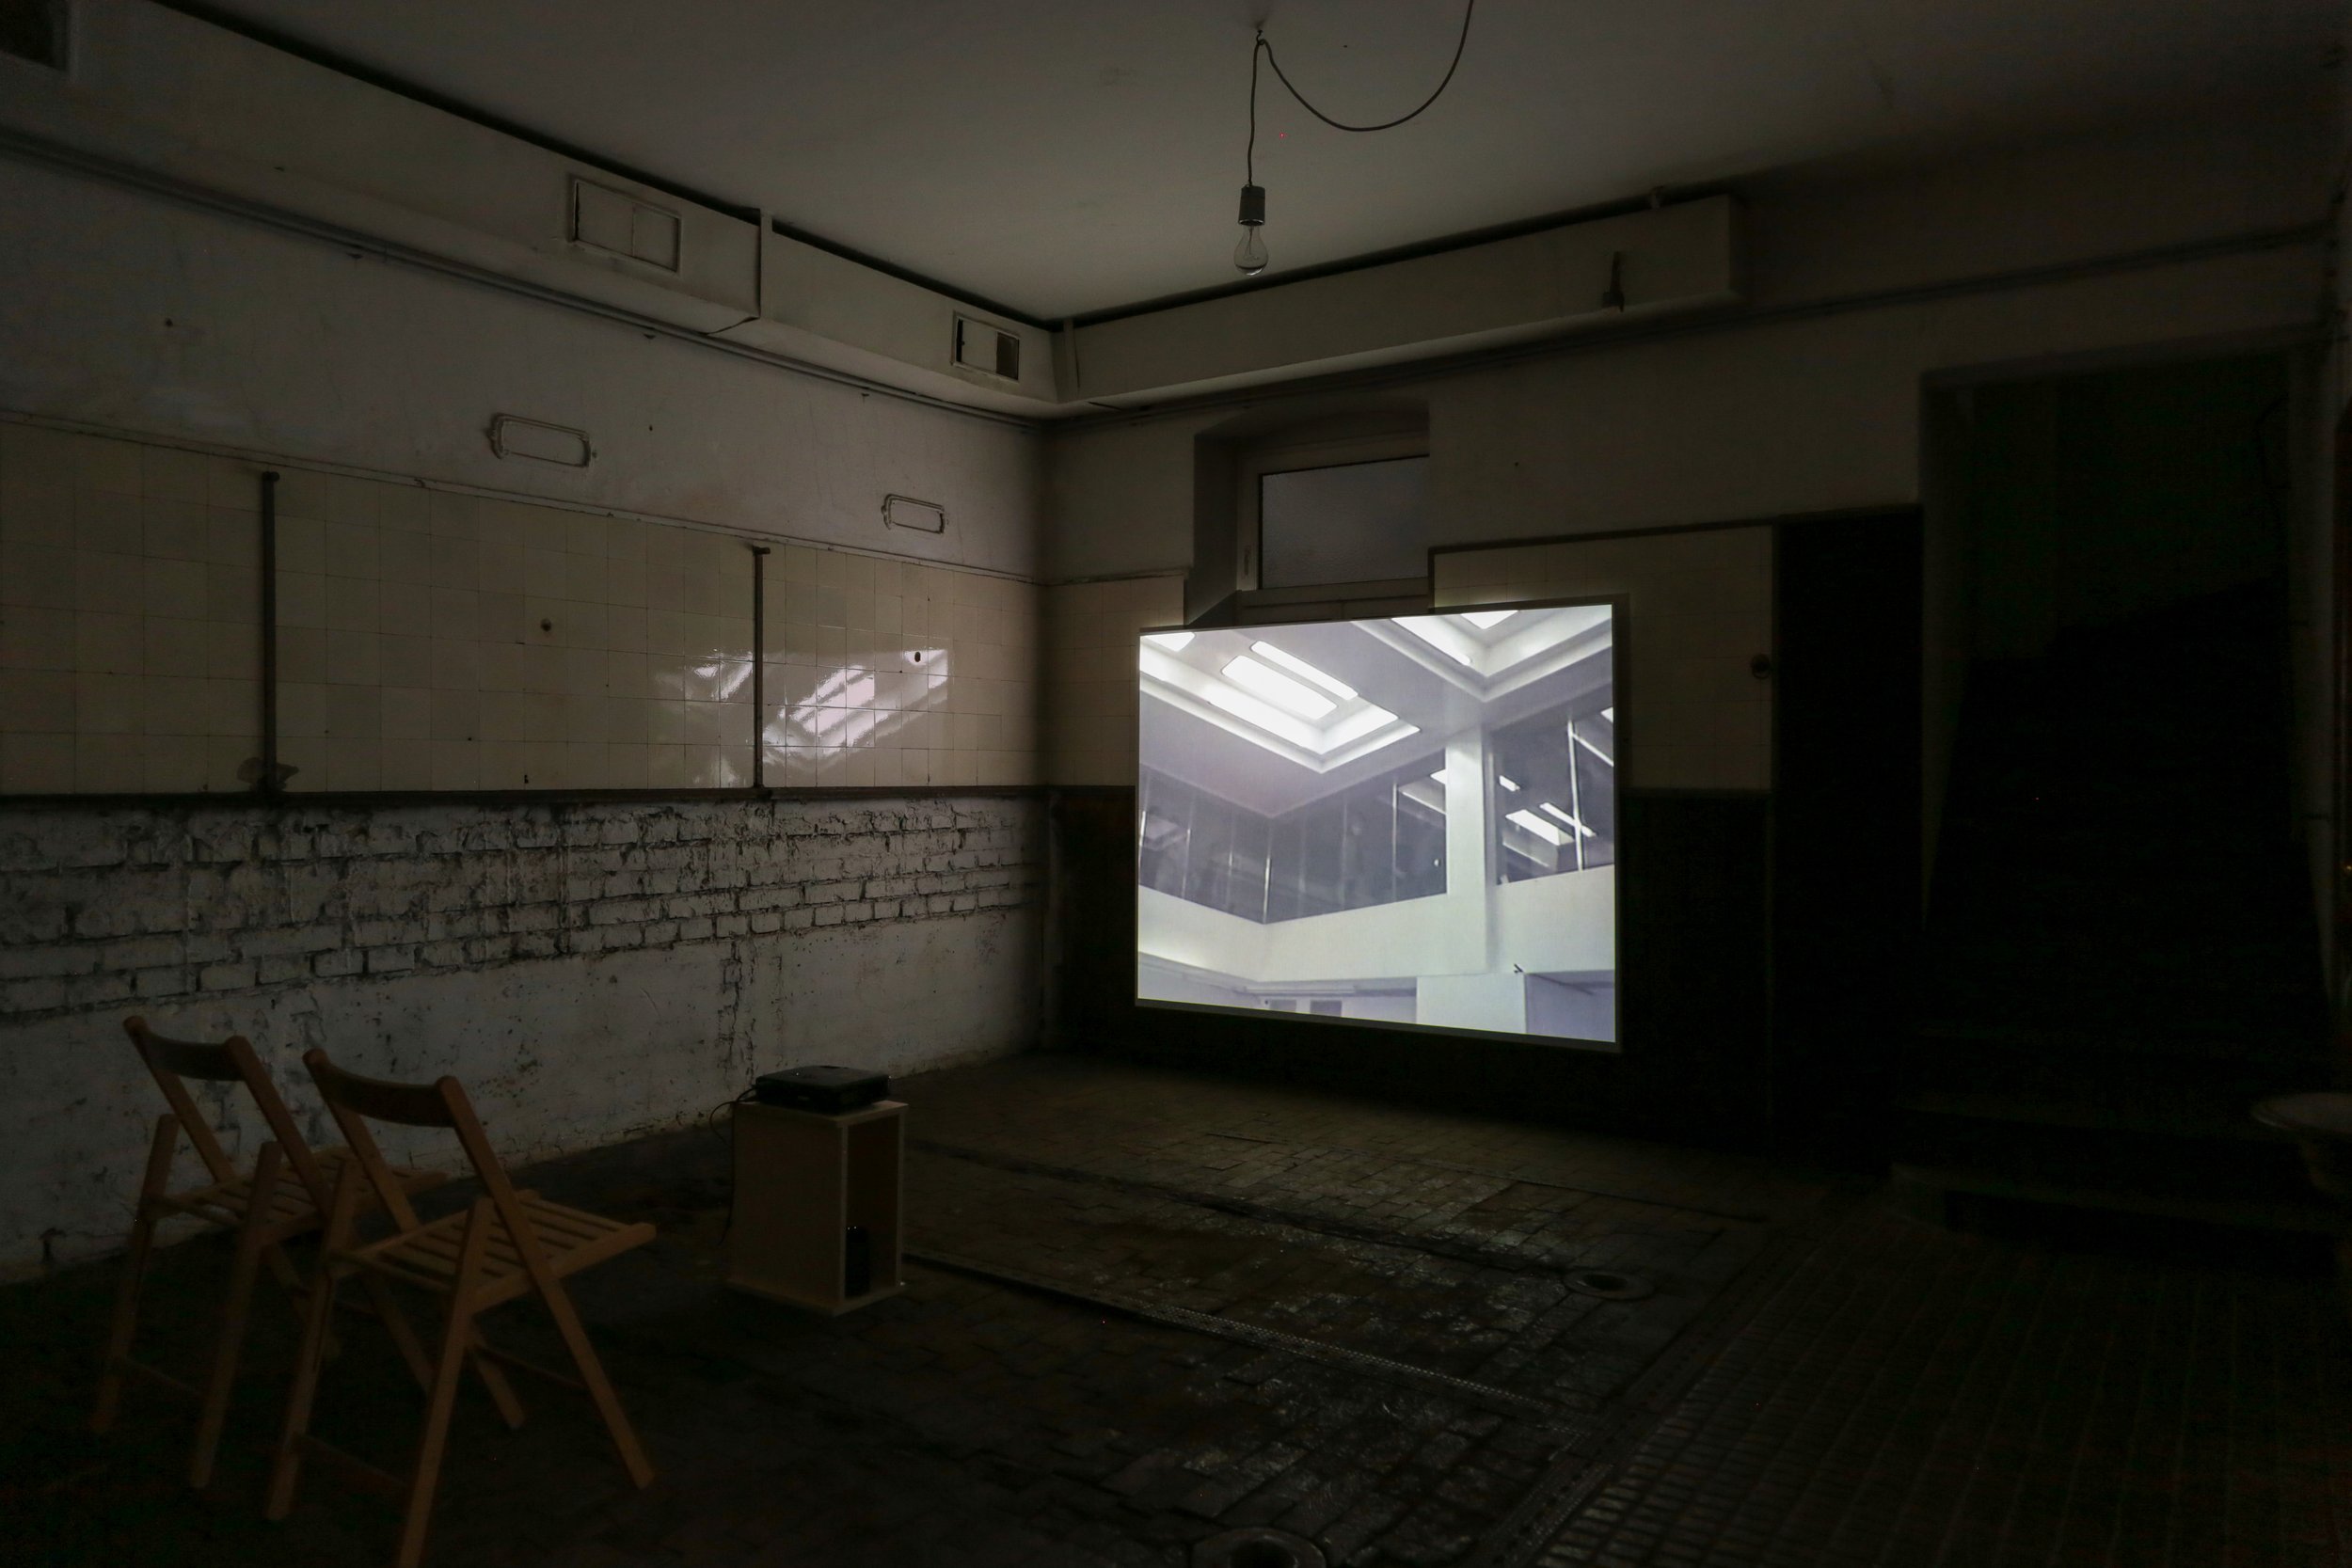   fig16 installation view Toine Horvers, Rolling, 1986 , 00:15:53., In collections: De Appel, LIMA  